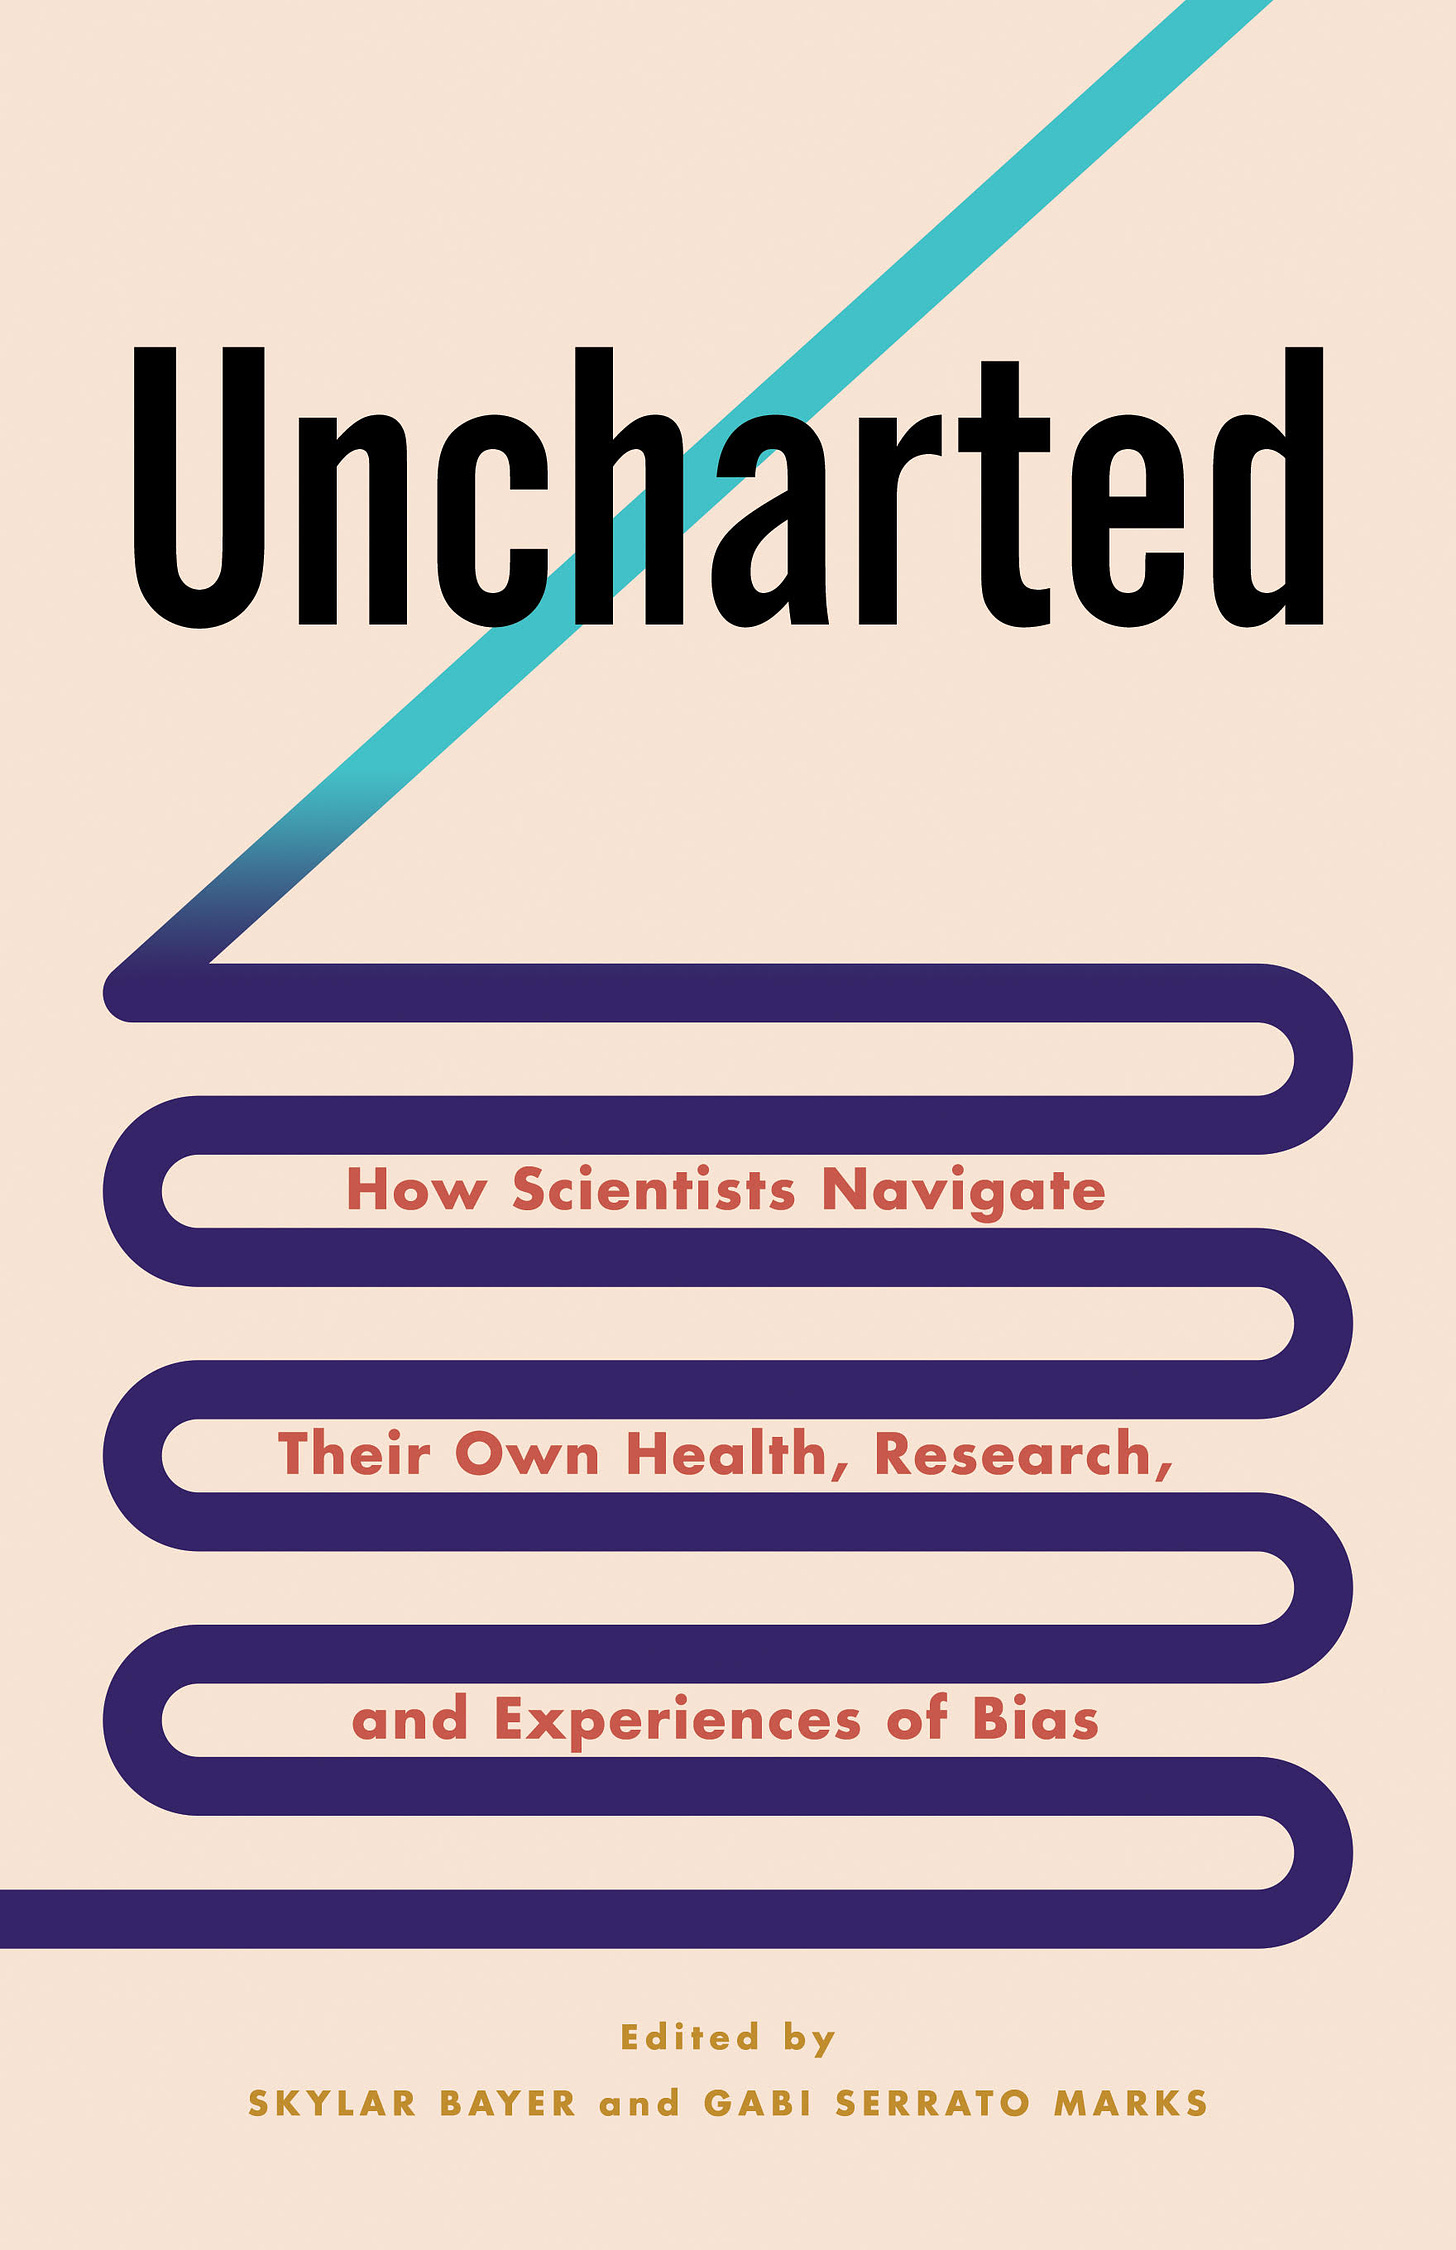 Uncharted book cover. There is a blue winding line across the cover. The full title is Uncharted: How Scientists Navigate Their Own Health, Research, and Experiences of Bias. Edited by Skylar Bayer and Gabi Serrato Marks